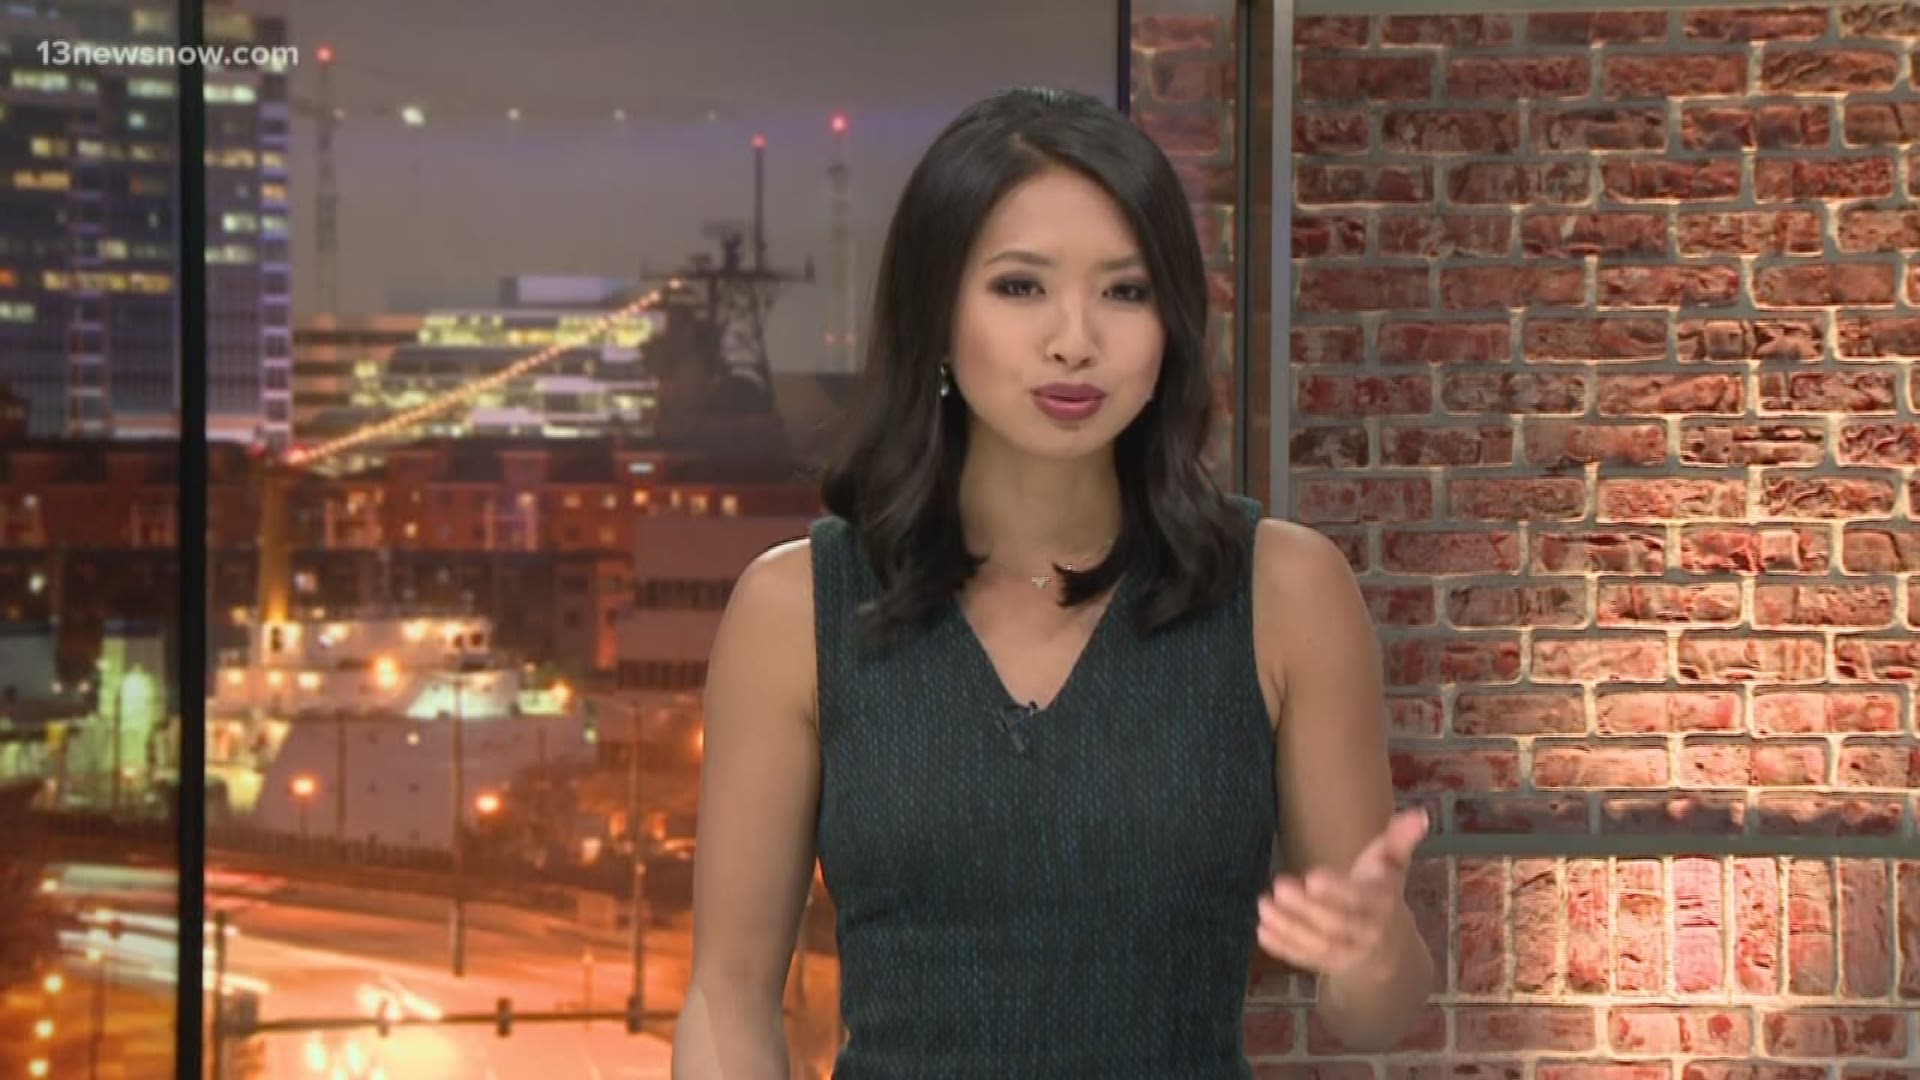 13News Now anchor Jaclyn Lee has the latest.